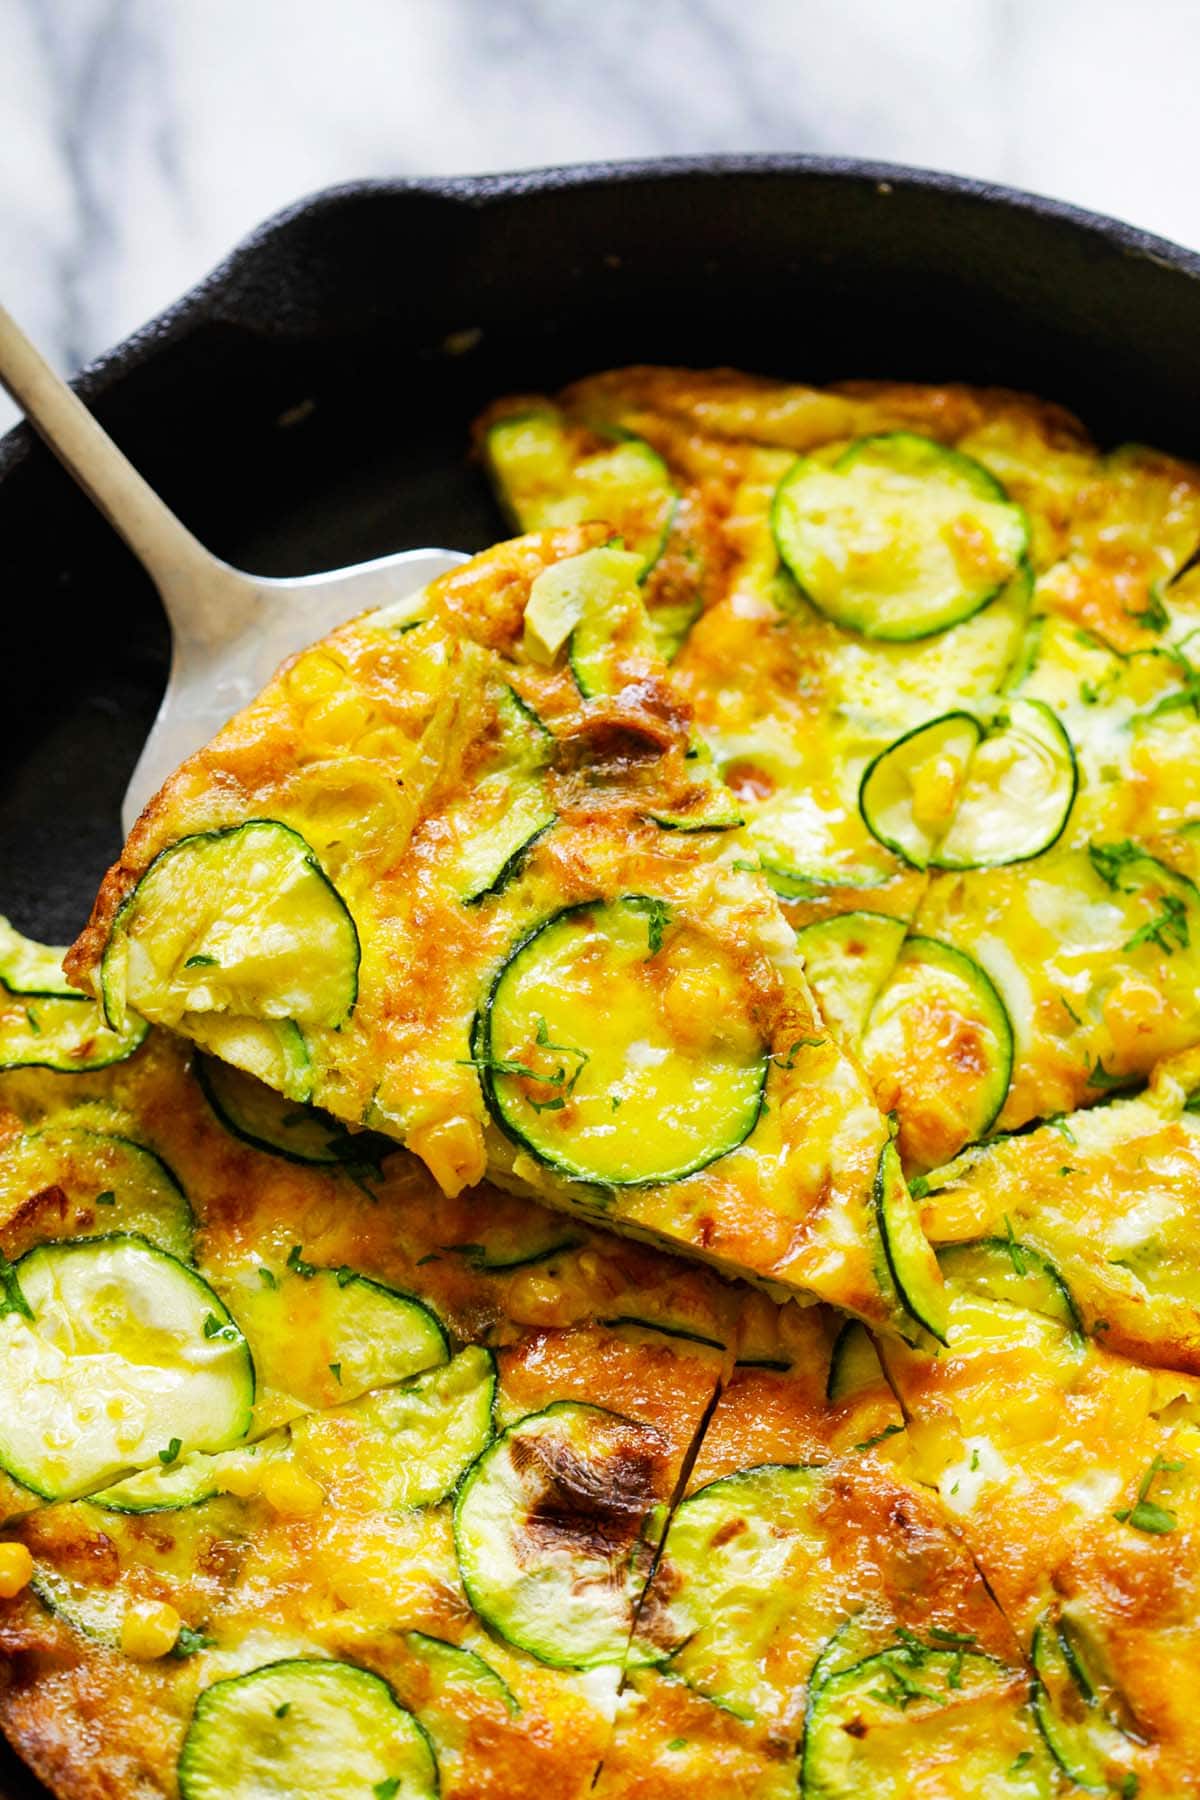 A slice of delicious frittata recipe made with zucchini and corn on a pizza shovel.